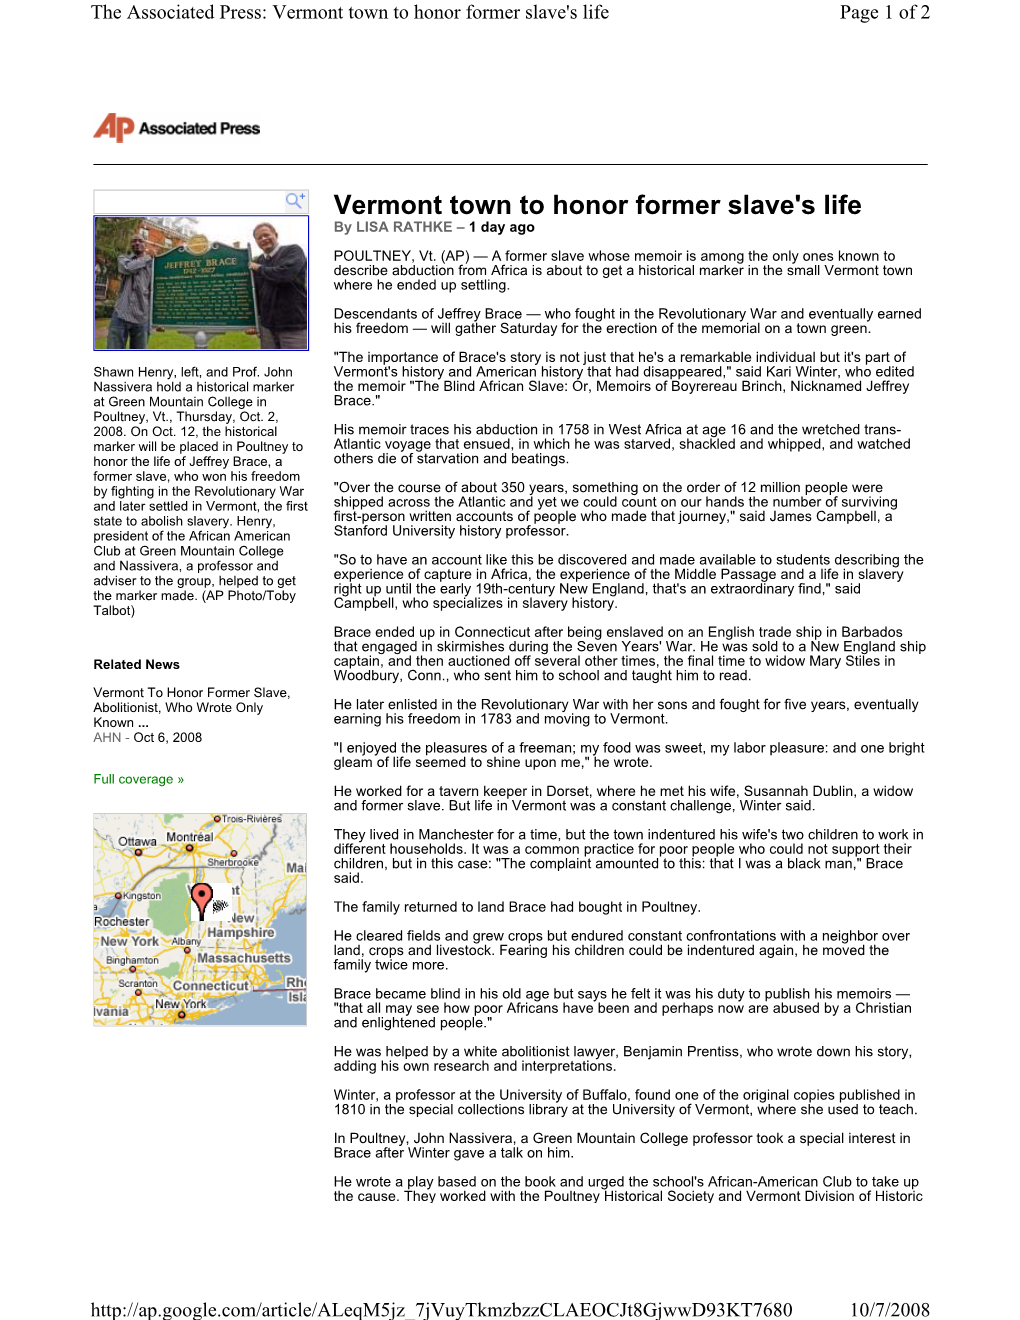 Vermont Town to Honor Former Slave's Life Page 1 of 2